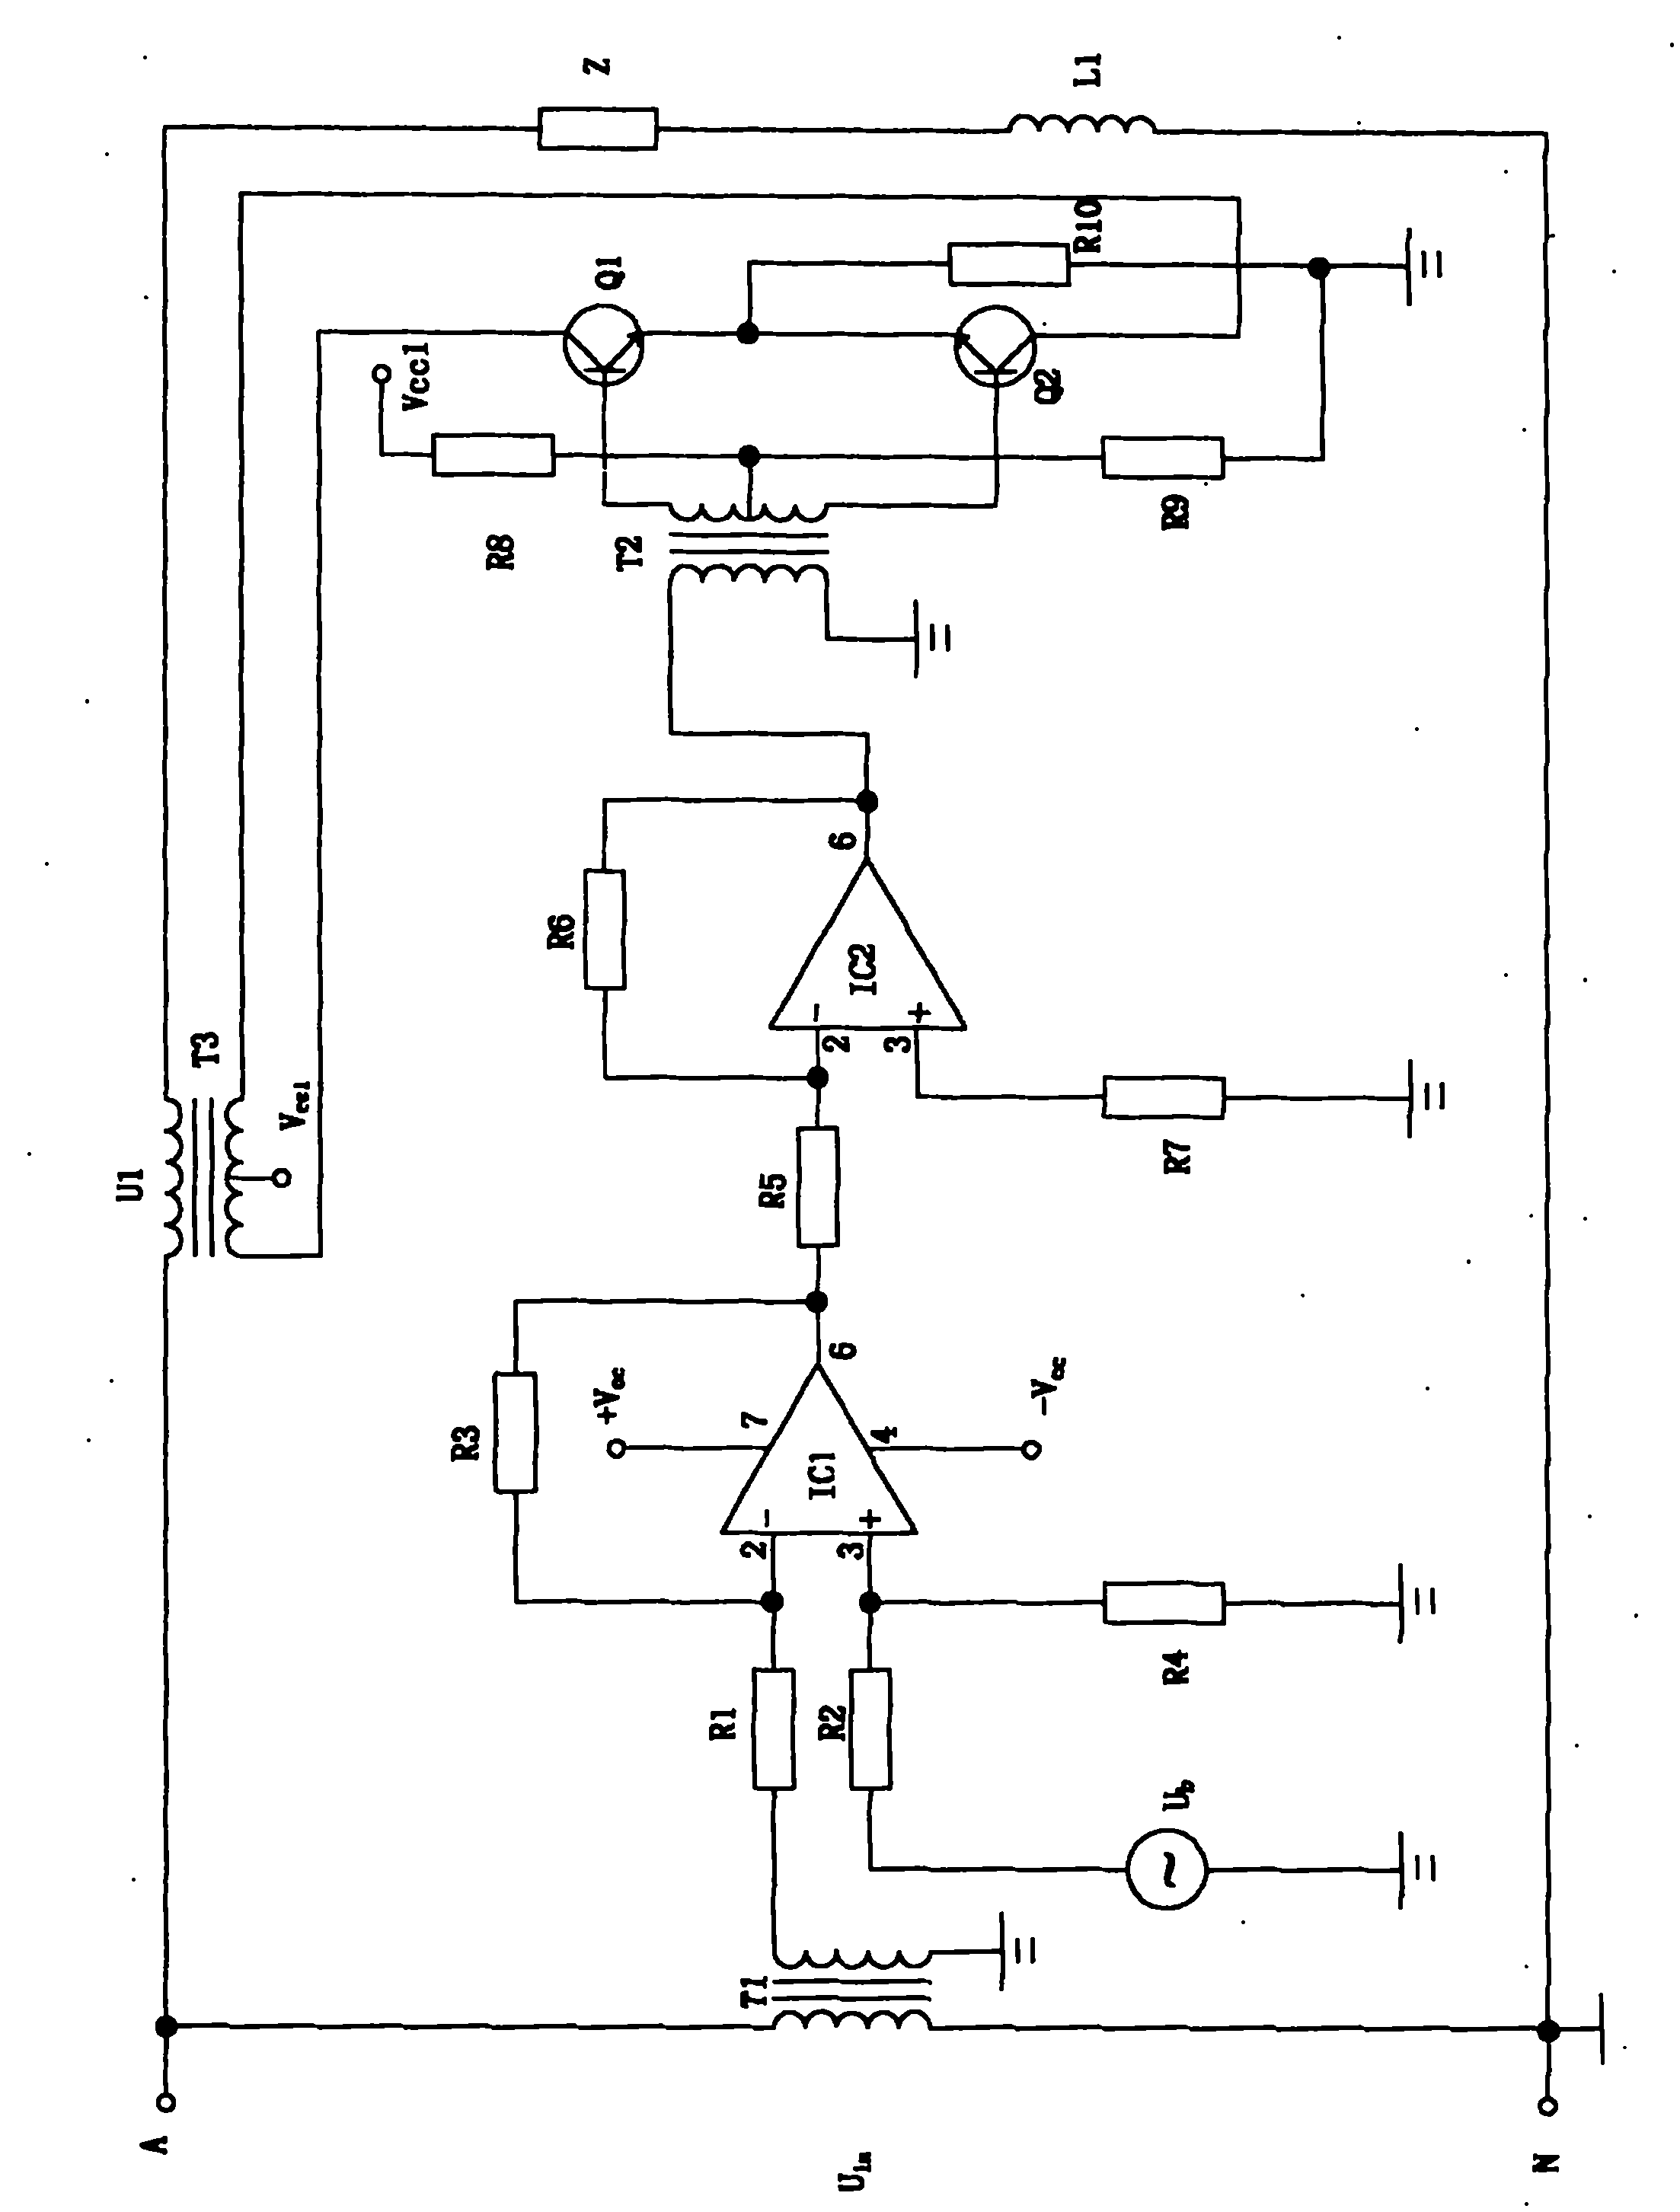 User power supply voltage and load current control device working according to electric network requirements and user need